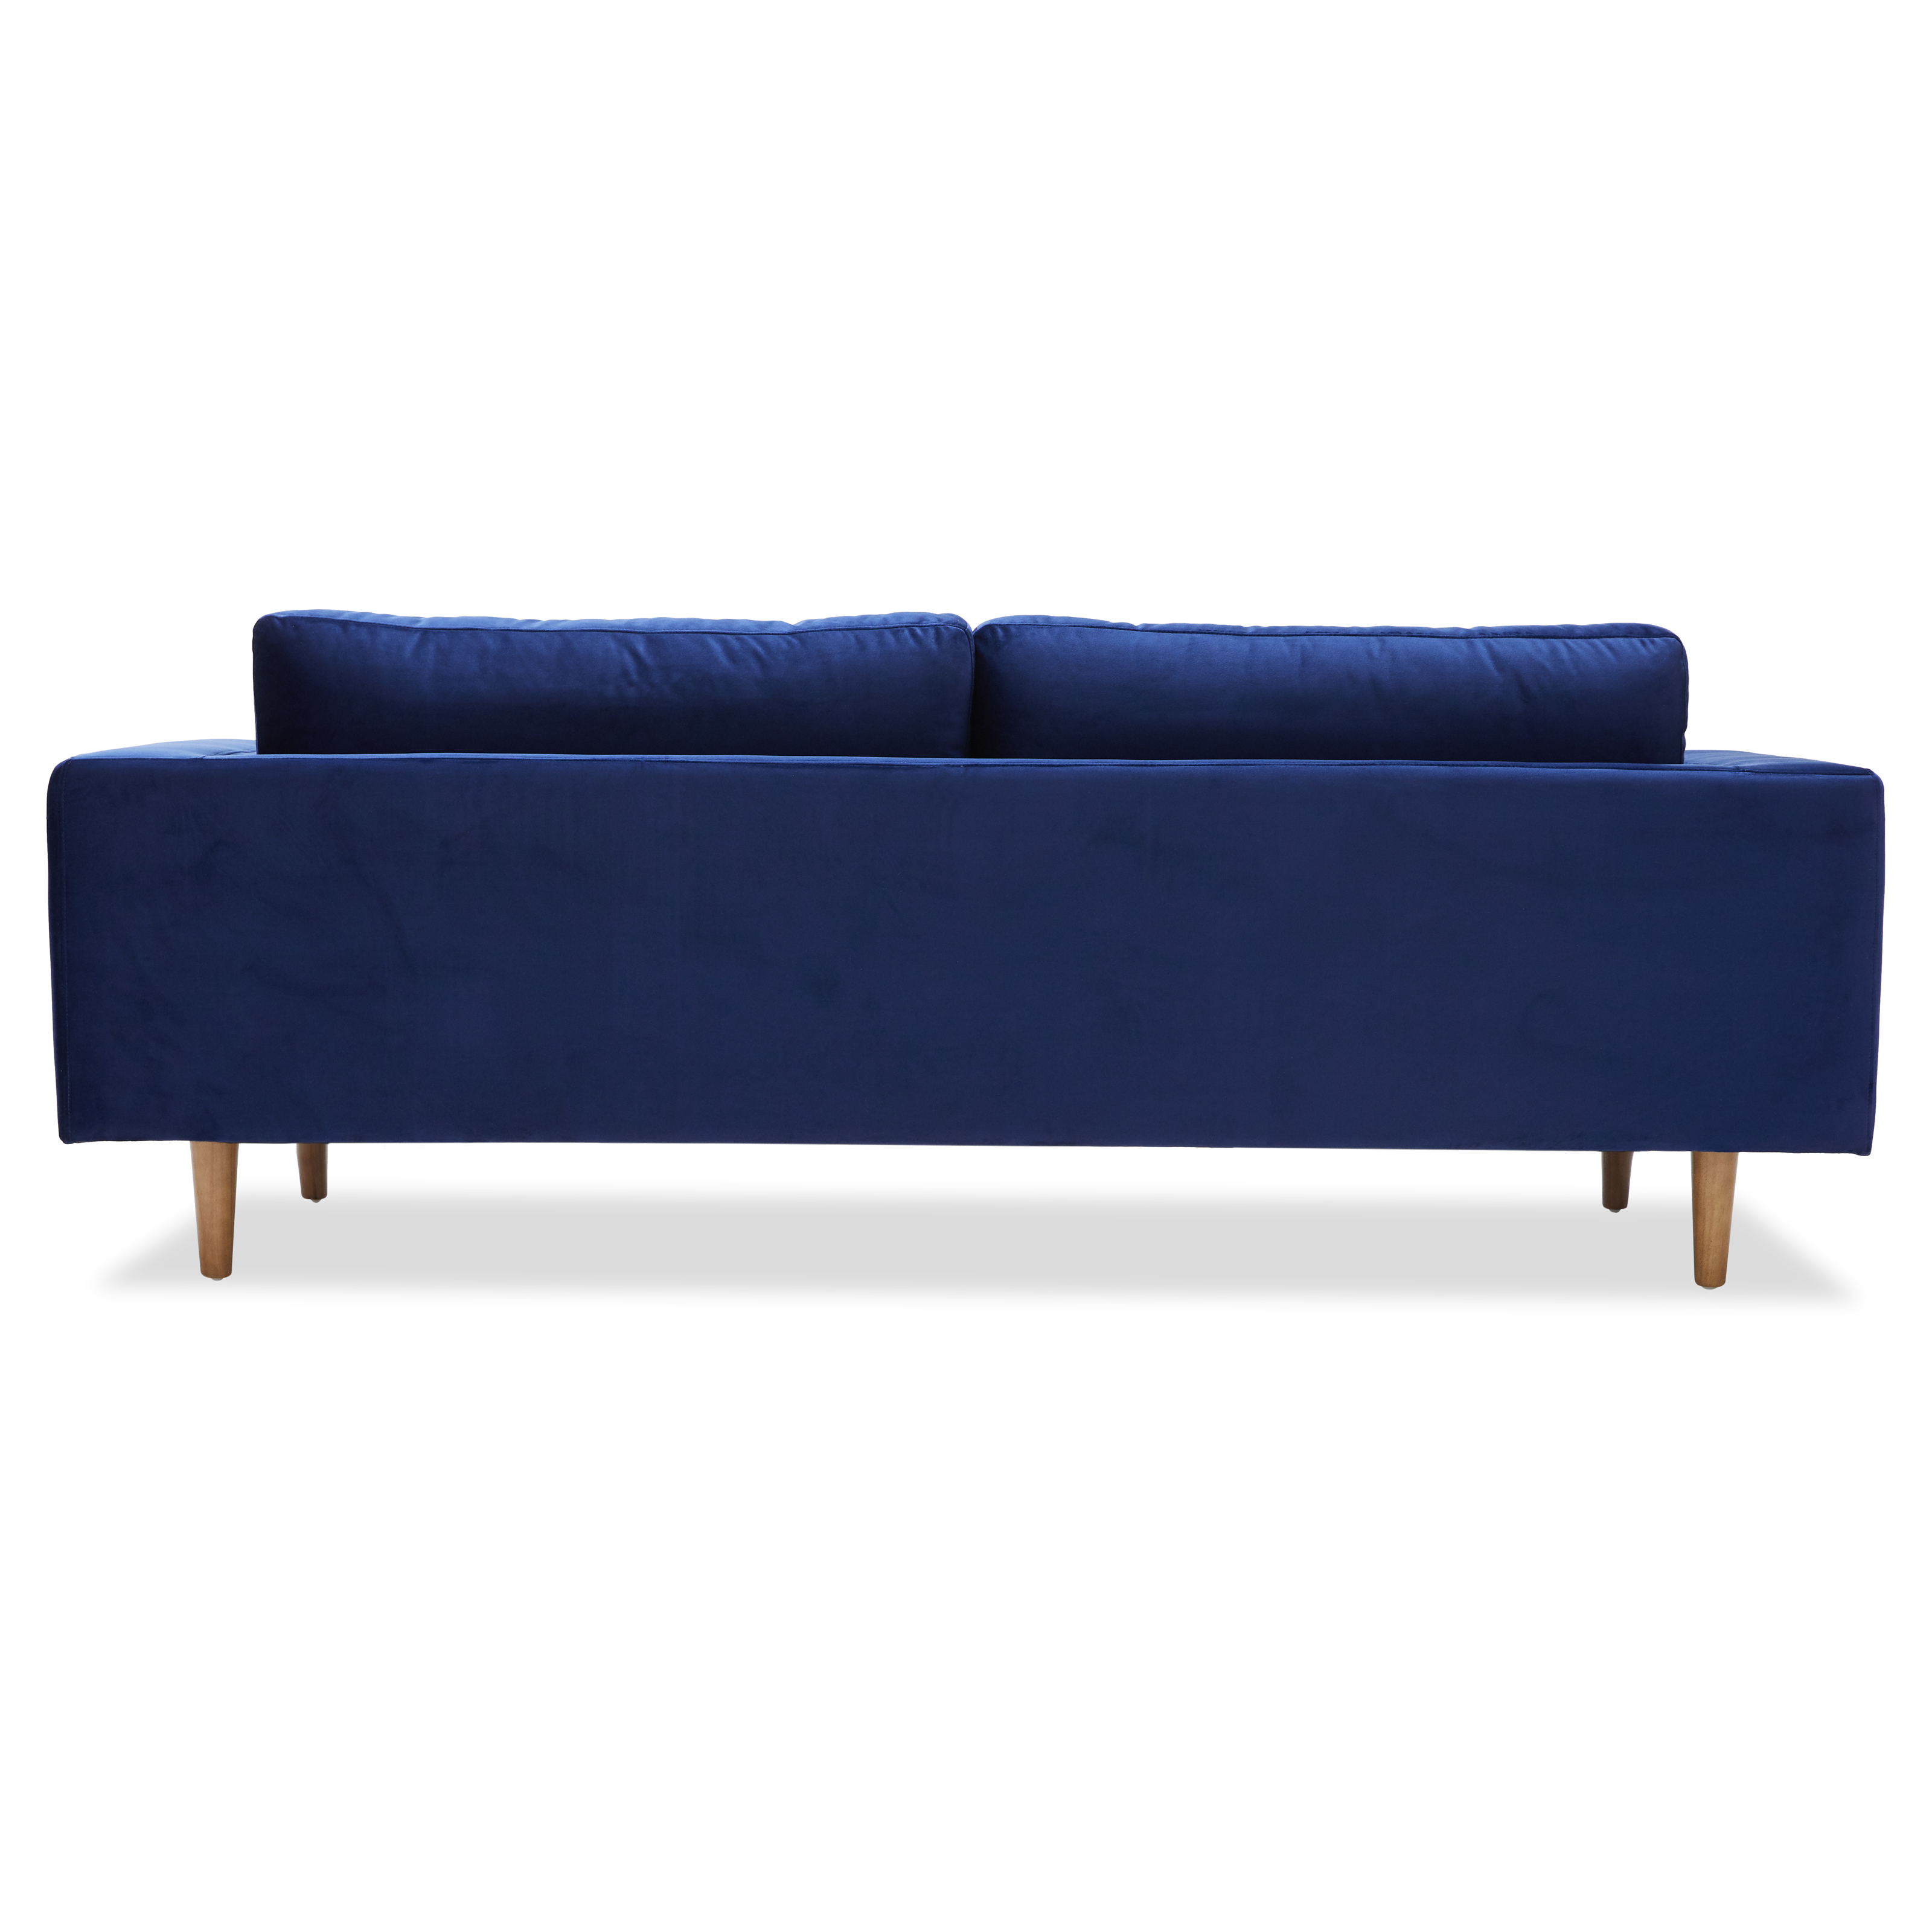 Drew Barrymore Flower Home Sofa, Multiple Colors - image 10 of 12